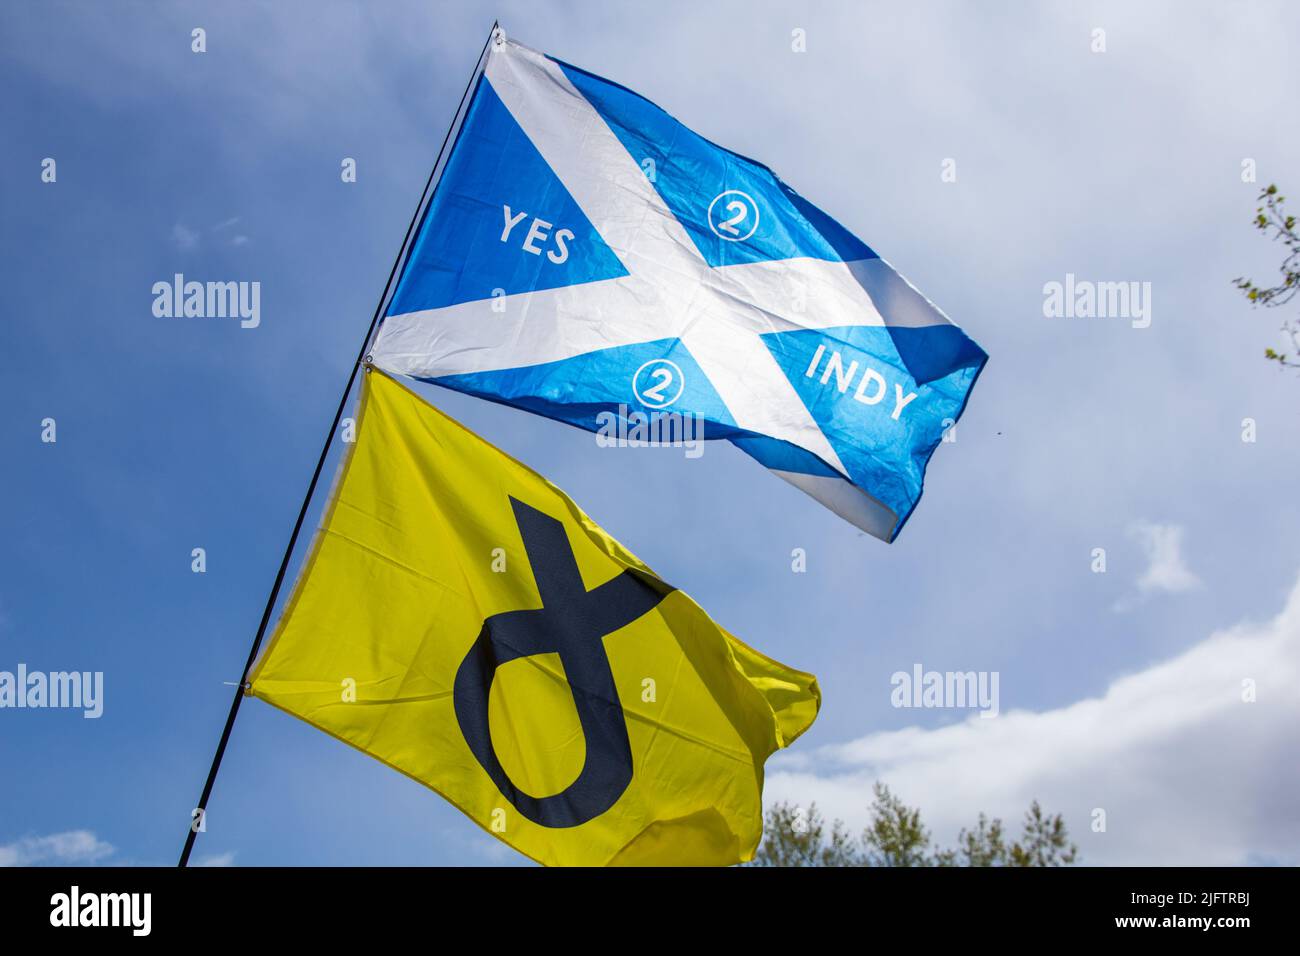 Scottish Flag 'Yes Indy 2' and Yellow SNP flag Stock Photo